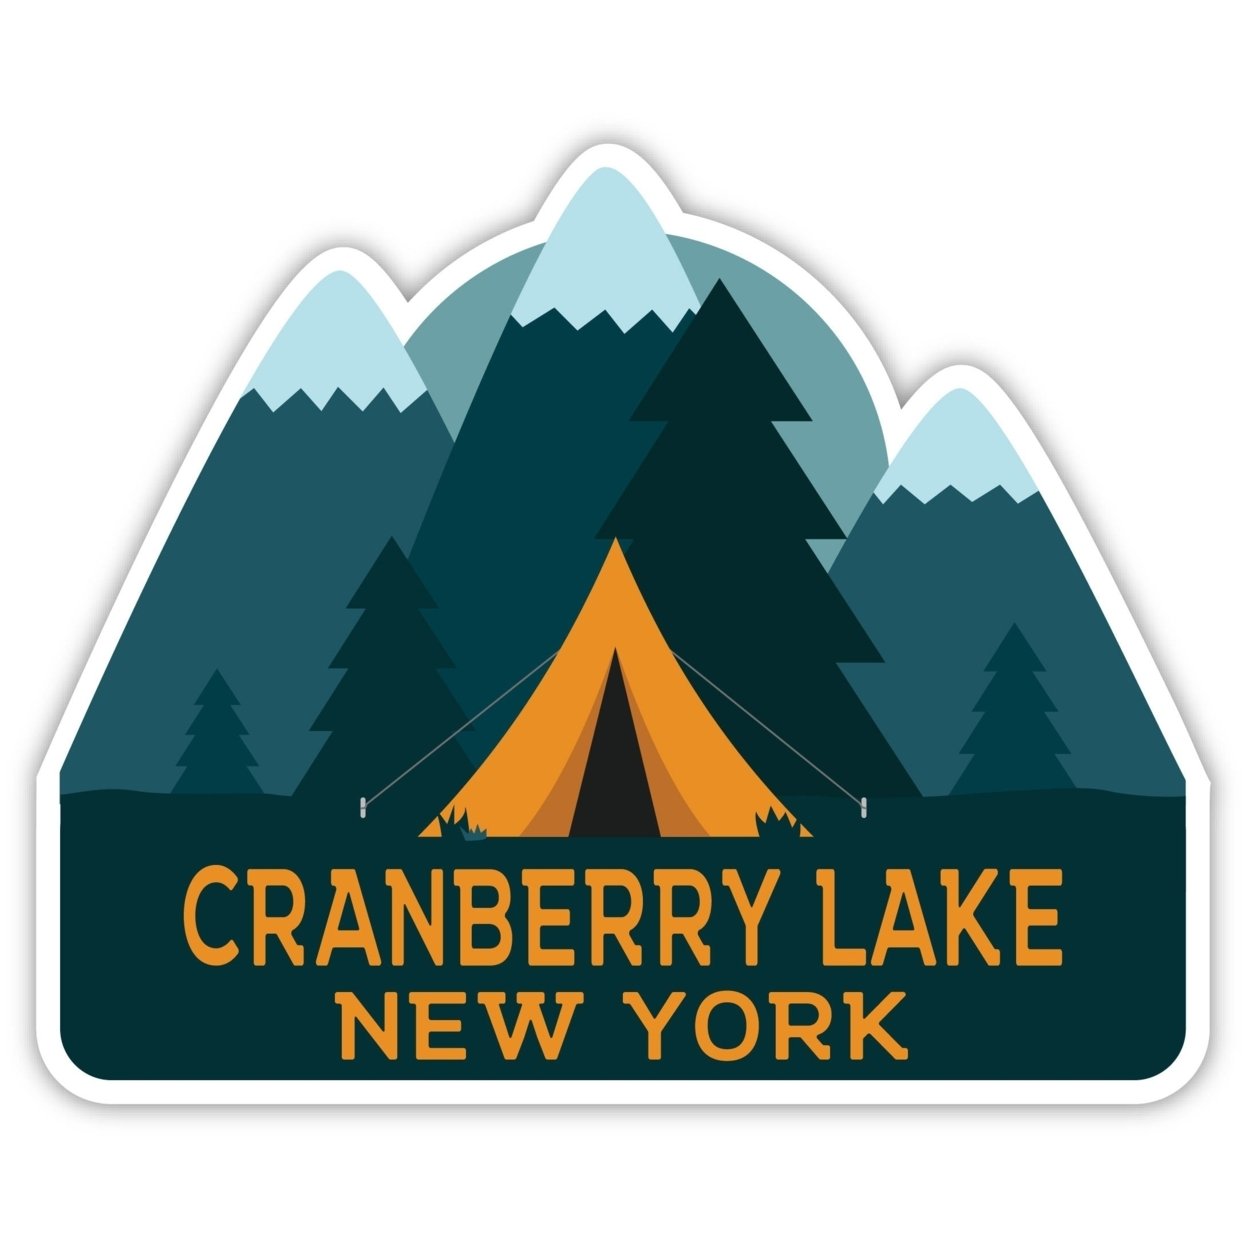 Cranberry Lake New York Souvenir Decorative Stickers (Choose Theme And Size) - 4-Pack, 10-Inch, Camp Life